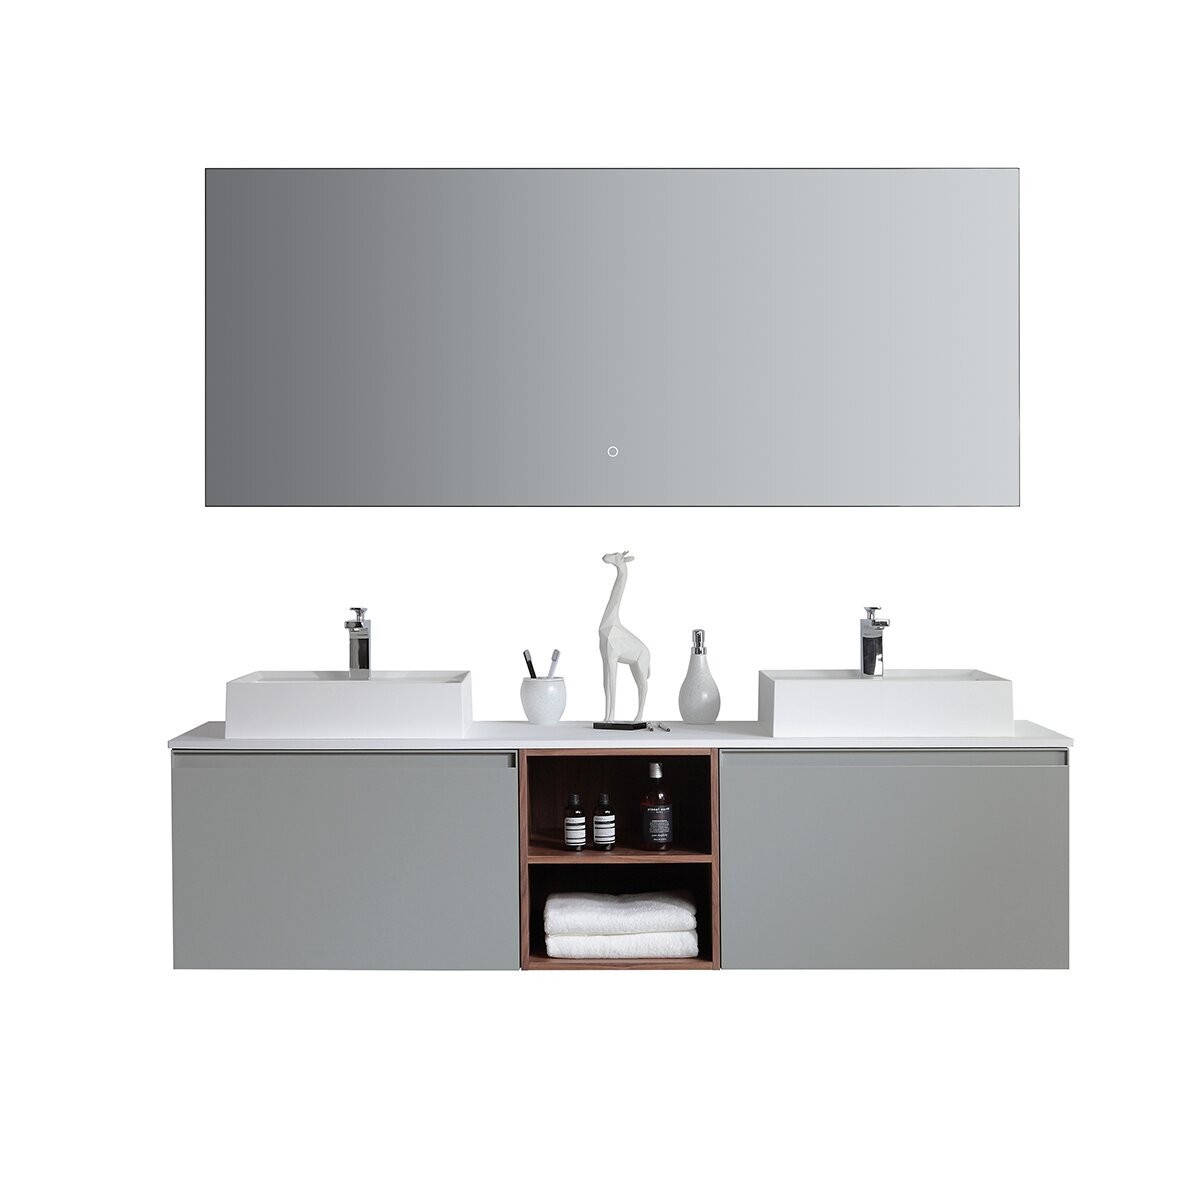 Wall mounted 72'' Double Sink Vanity with Makeup Area, Raised Basins, and Two Drawers